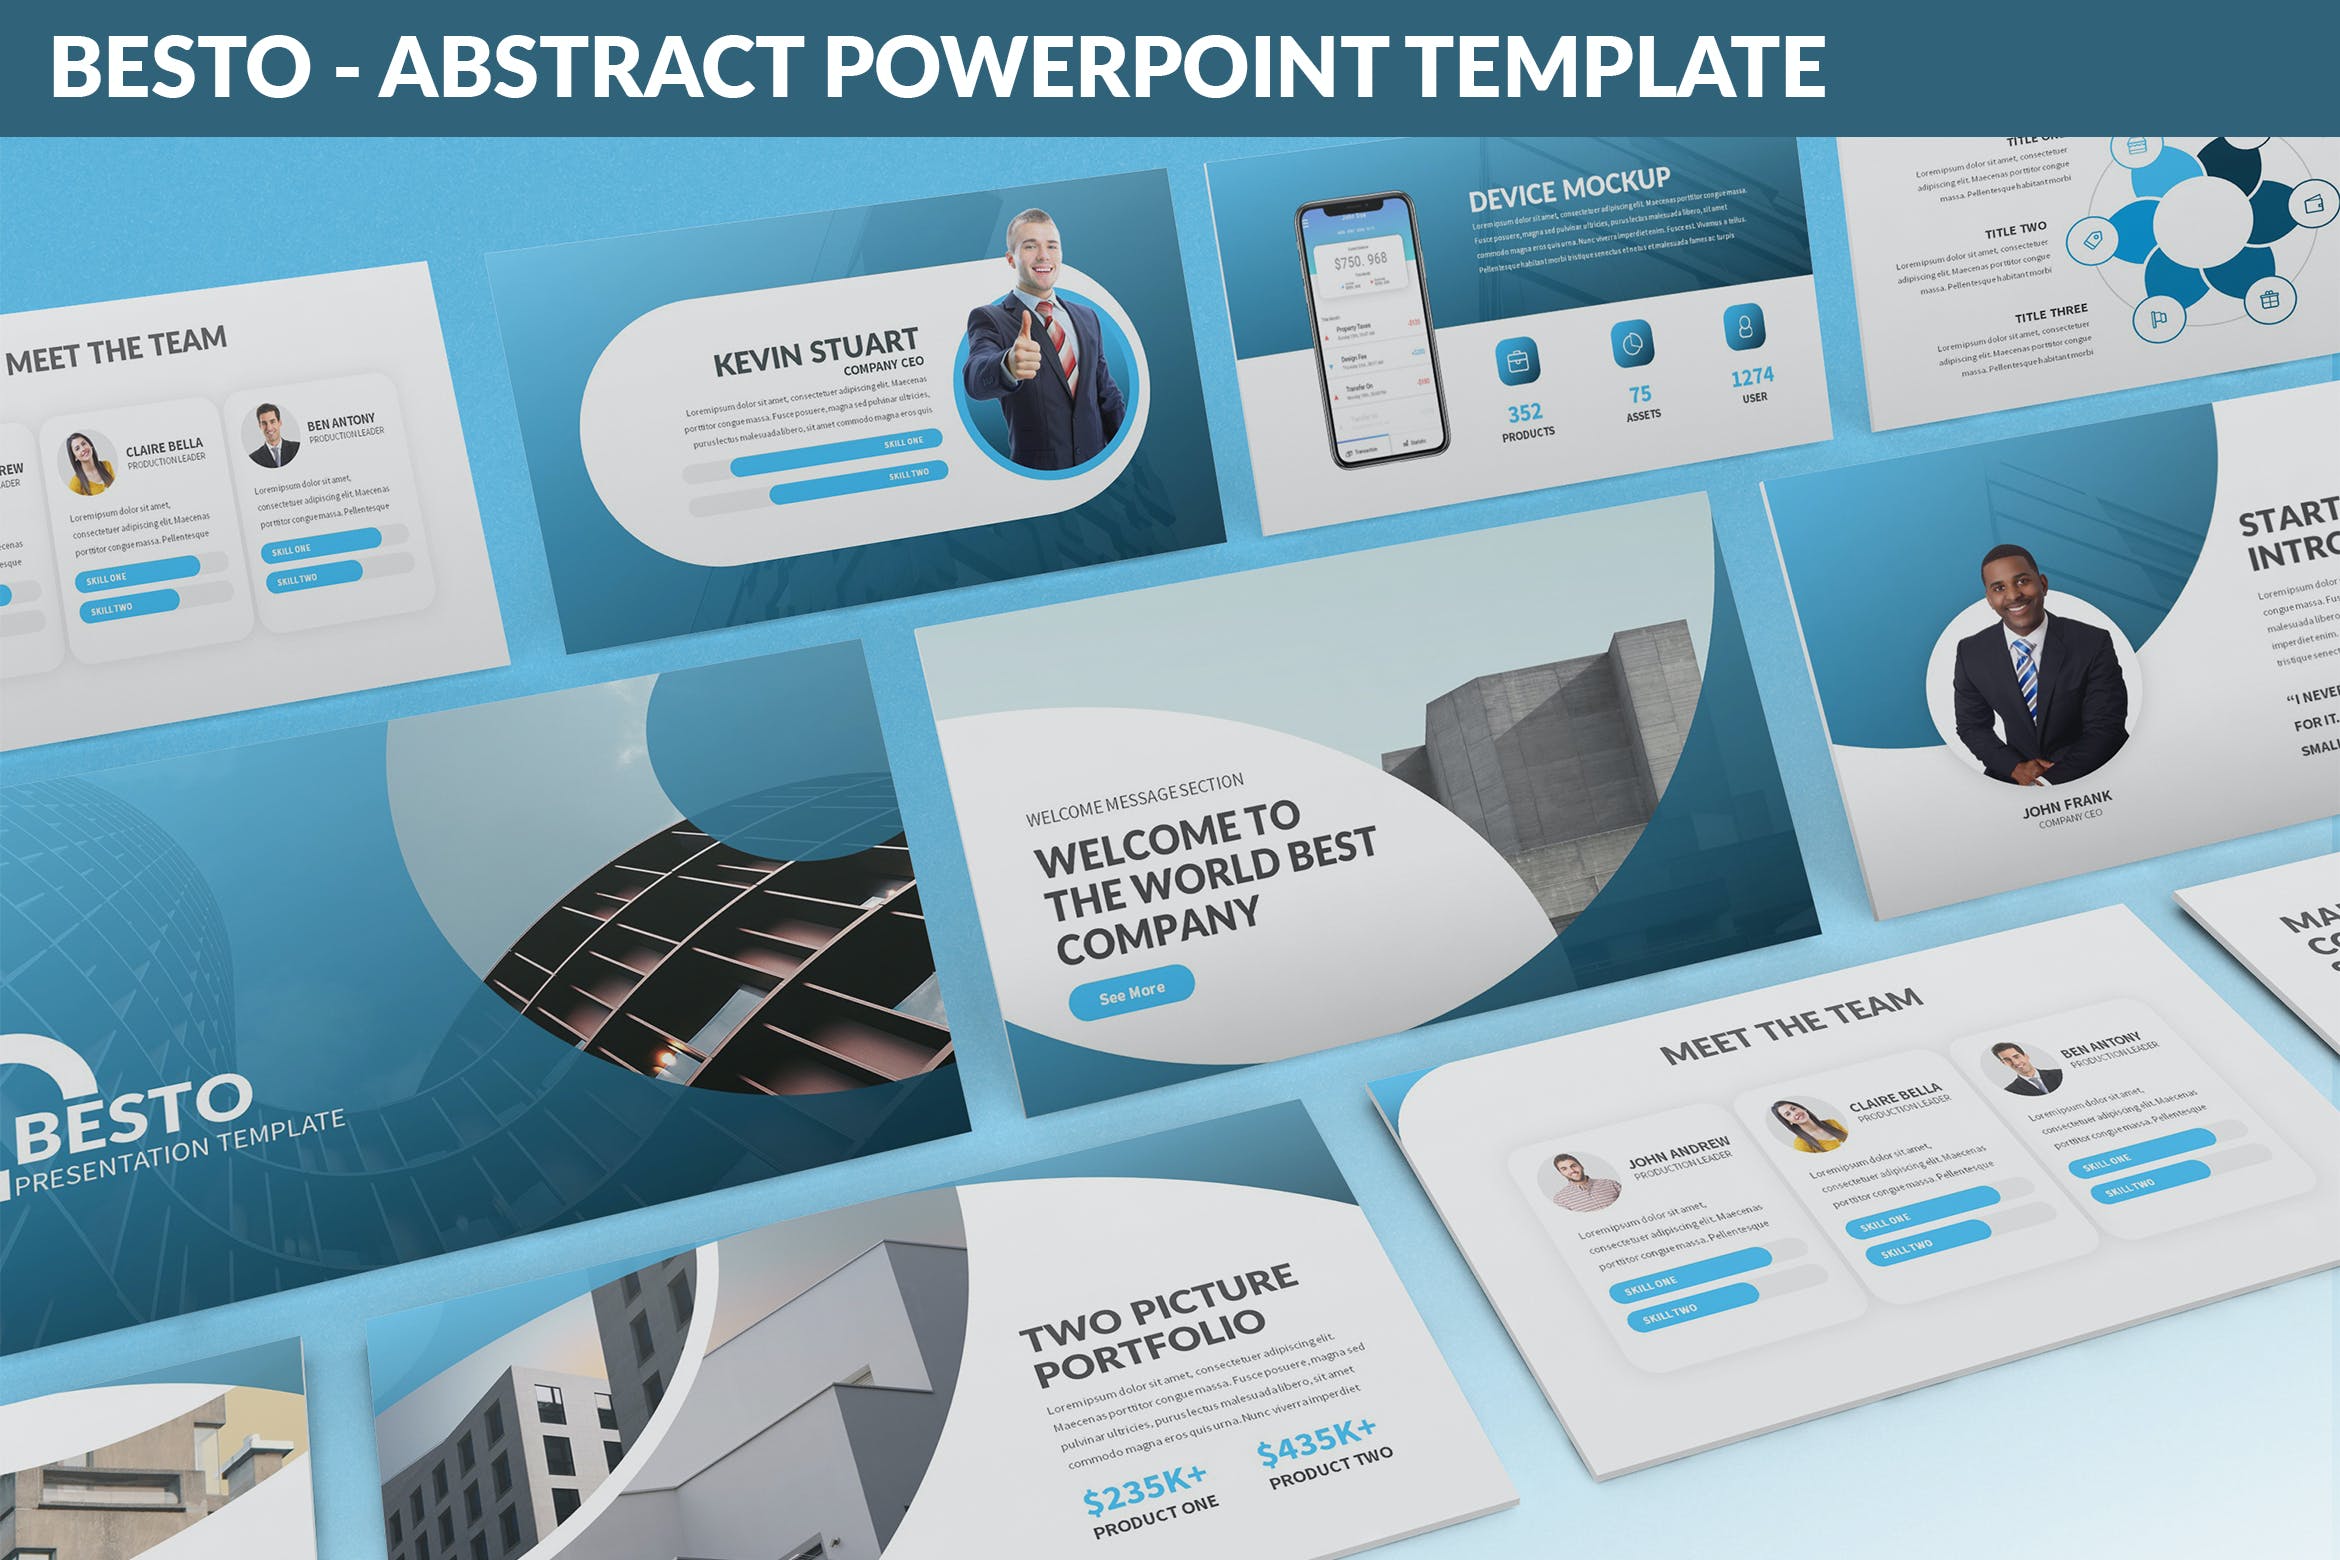 Cover image of Besto - Abstract Powerpoint Template.